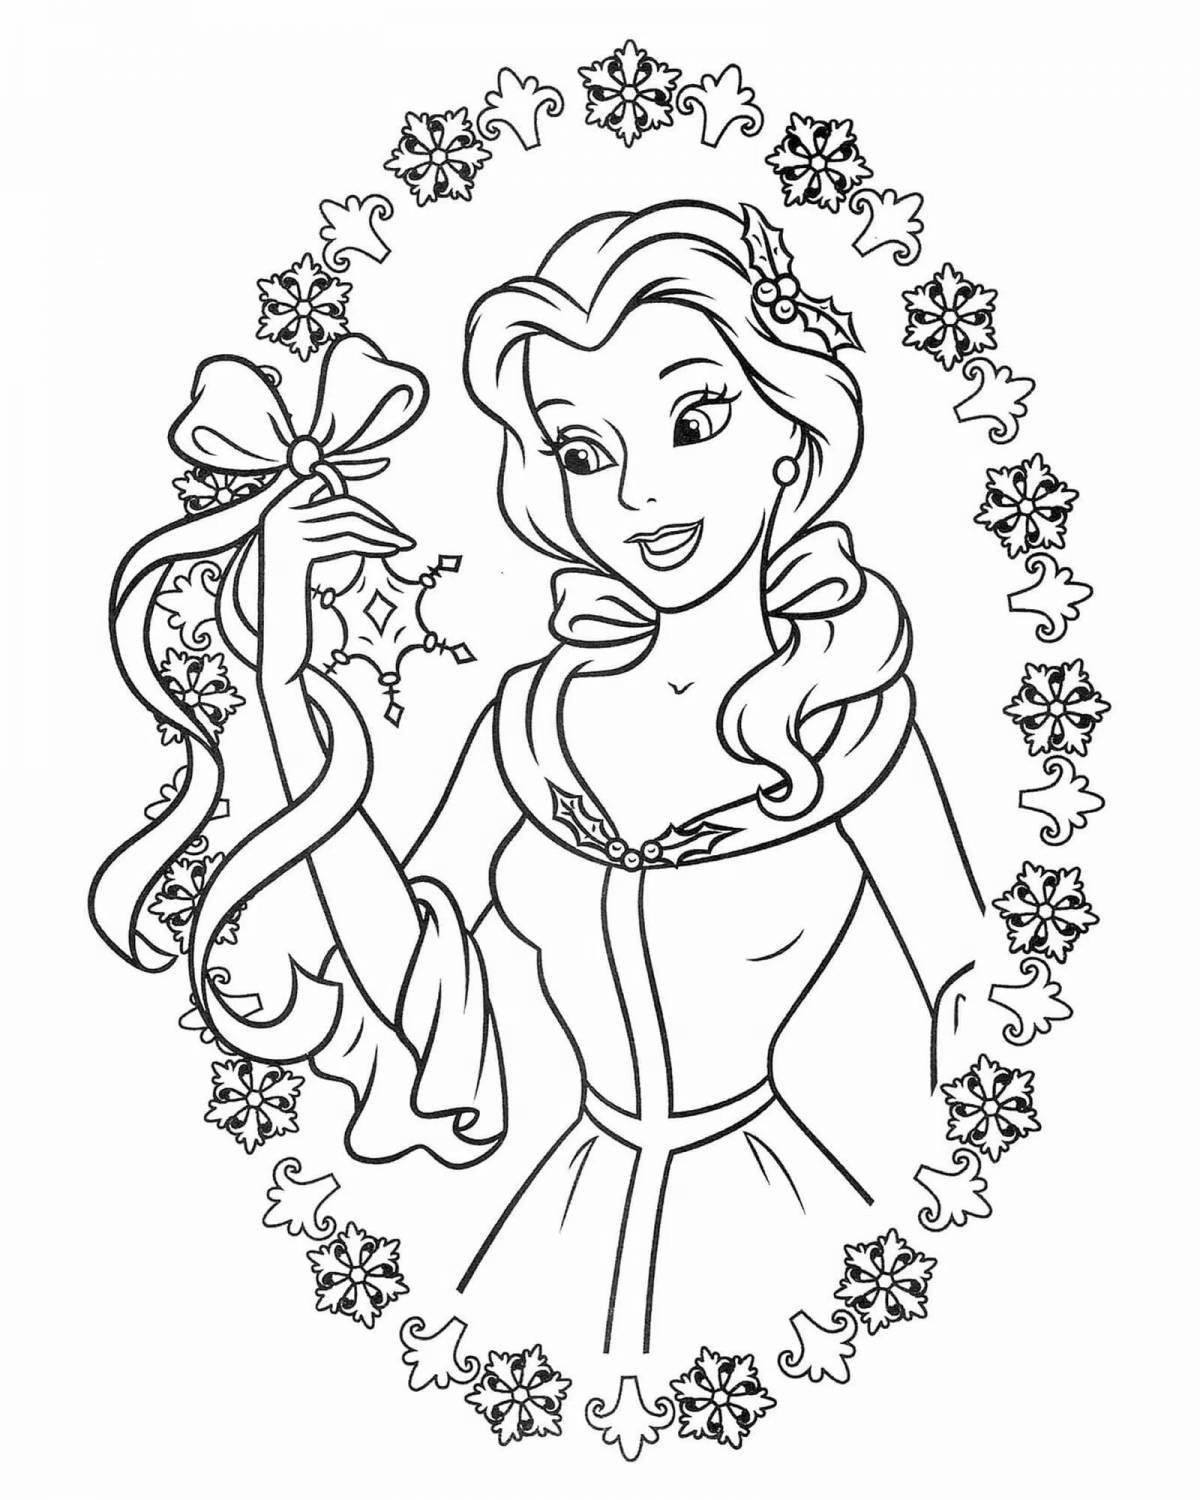 Disney glitter coloring book for kids 6-7 years old